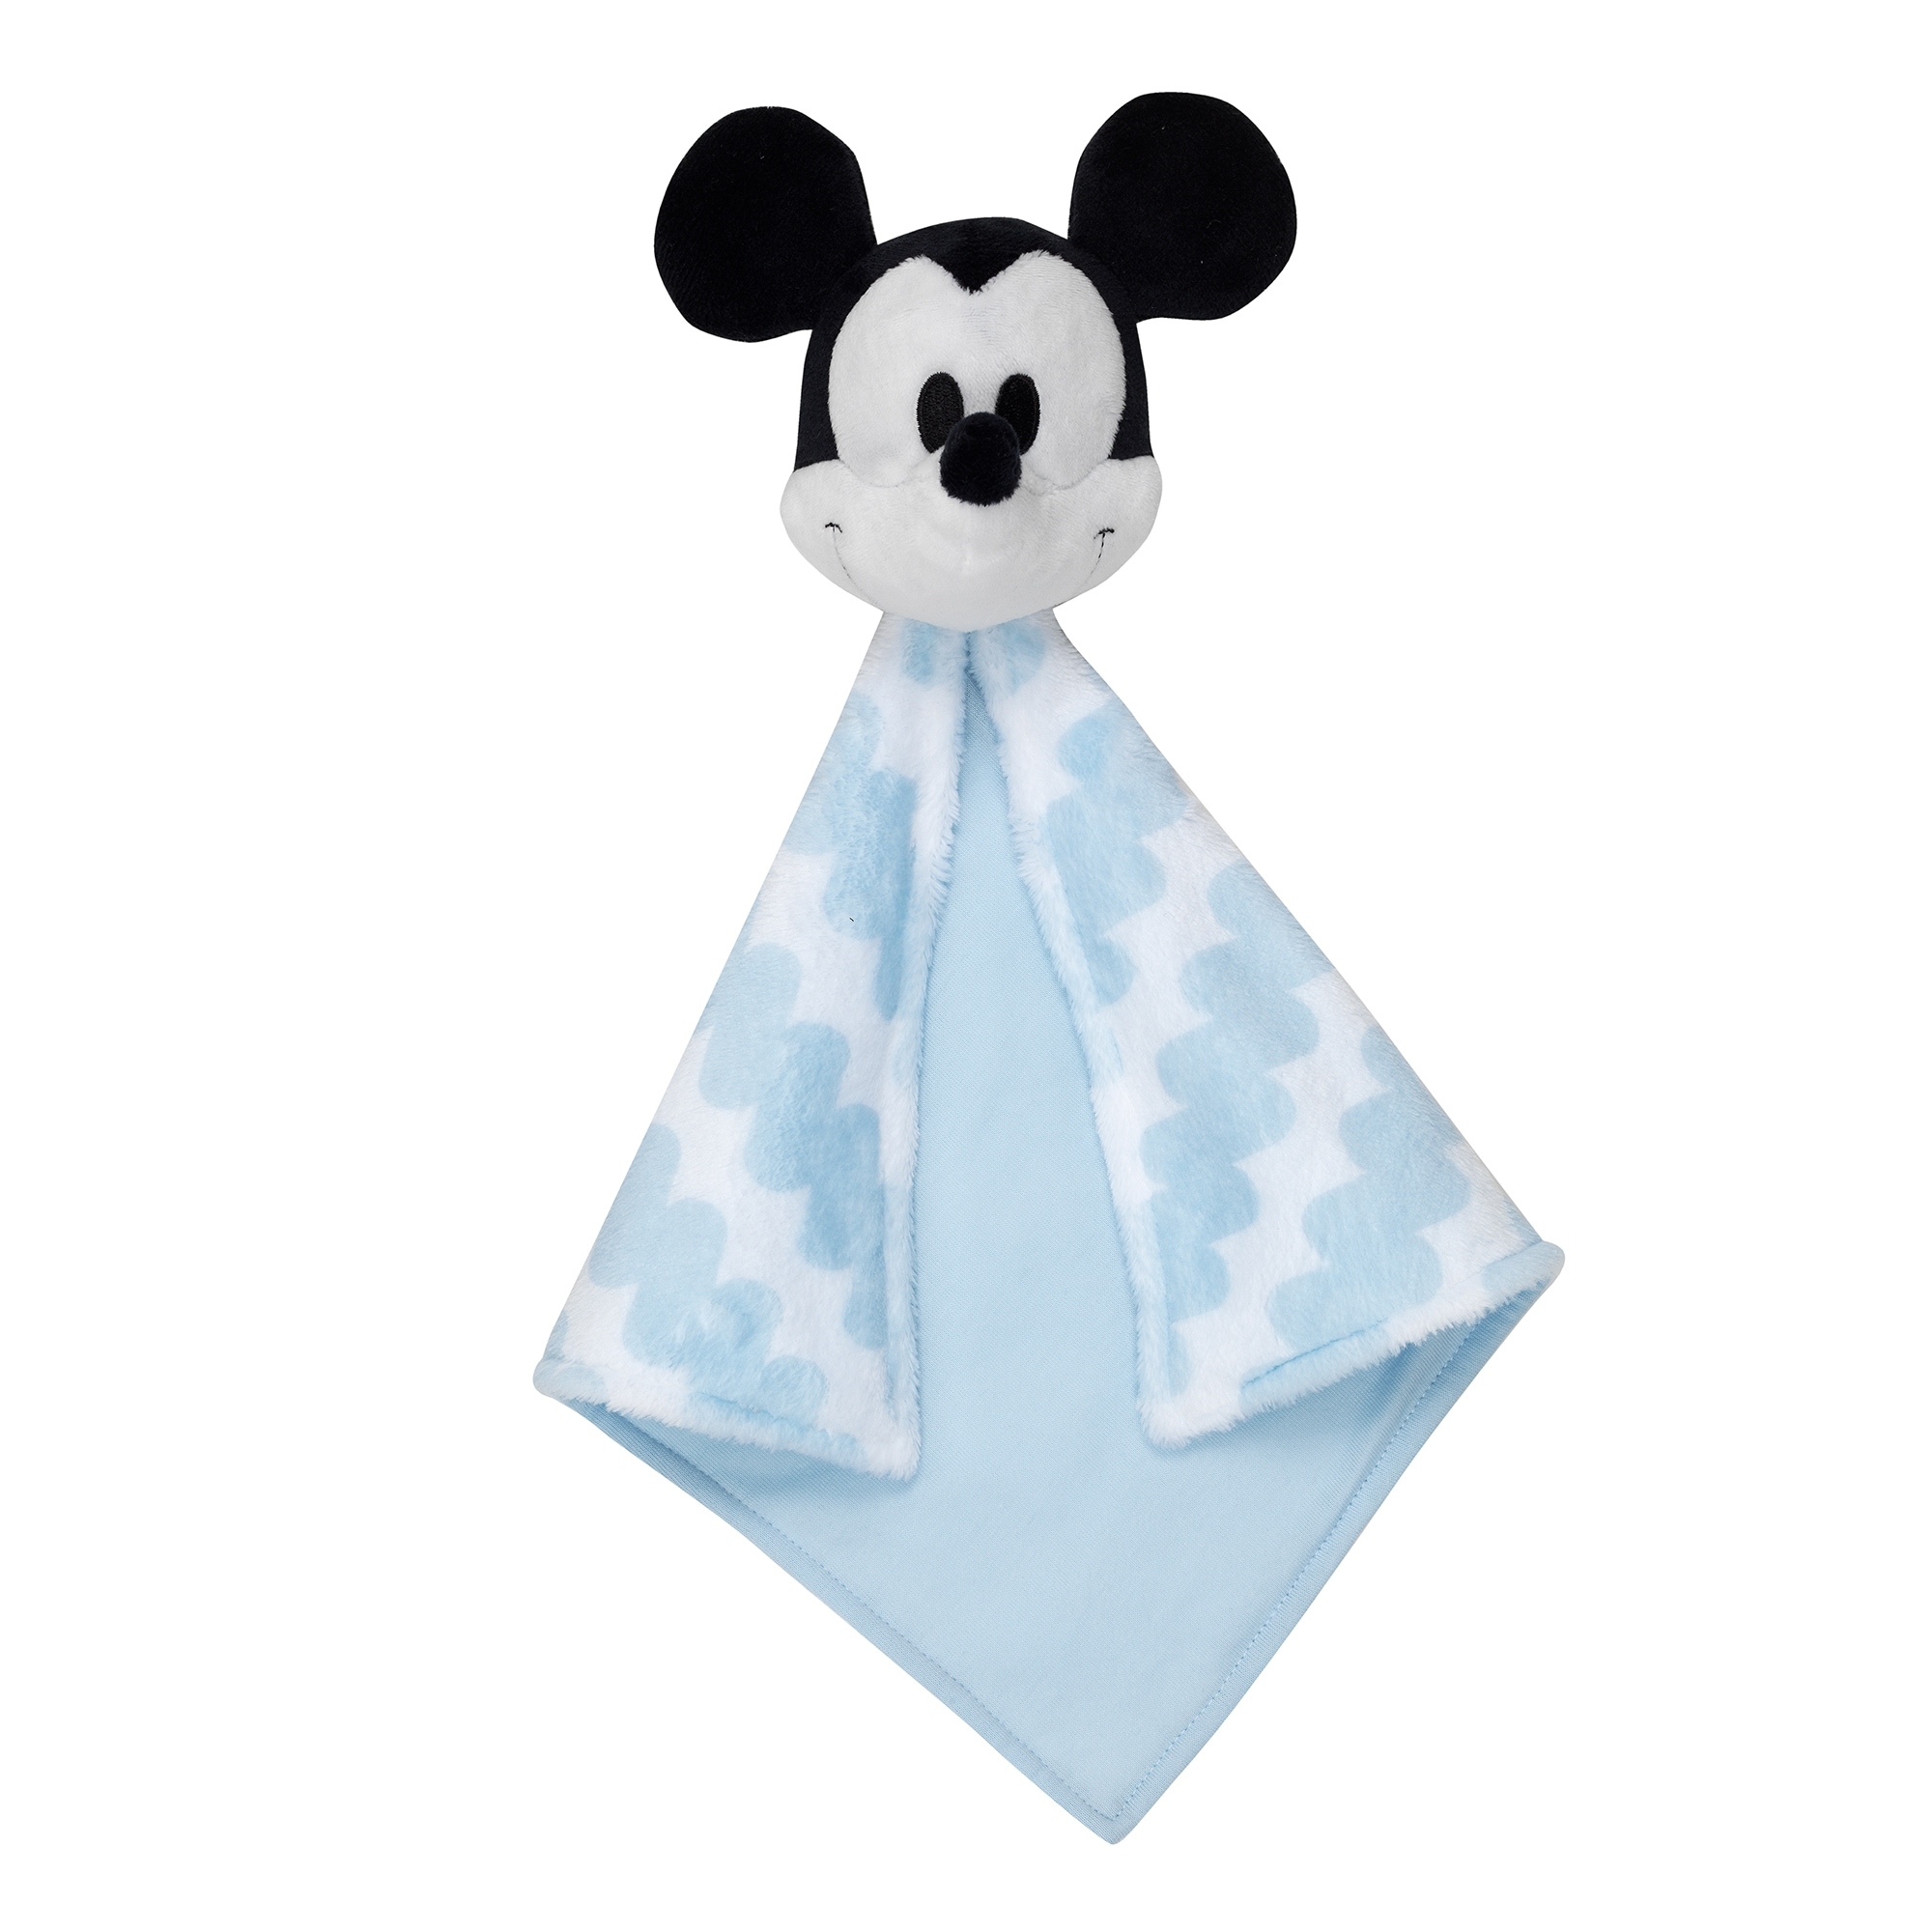 Lambs Ivy Disney Baby MICKEY MOUSE Lovey Blue White Plush Security Blanket On Sale Overstock 30798657